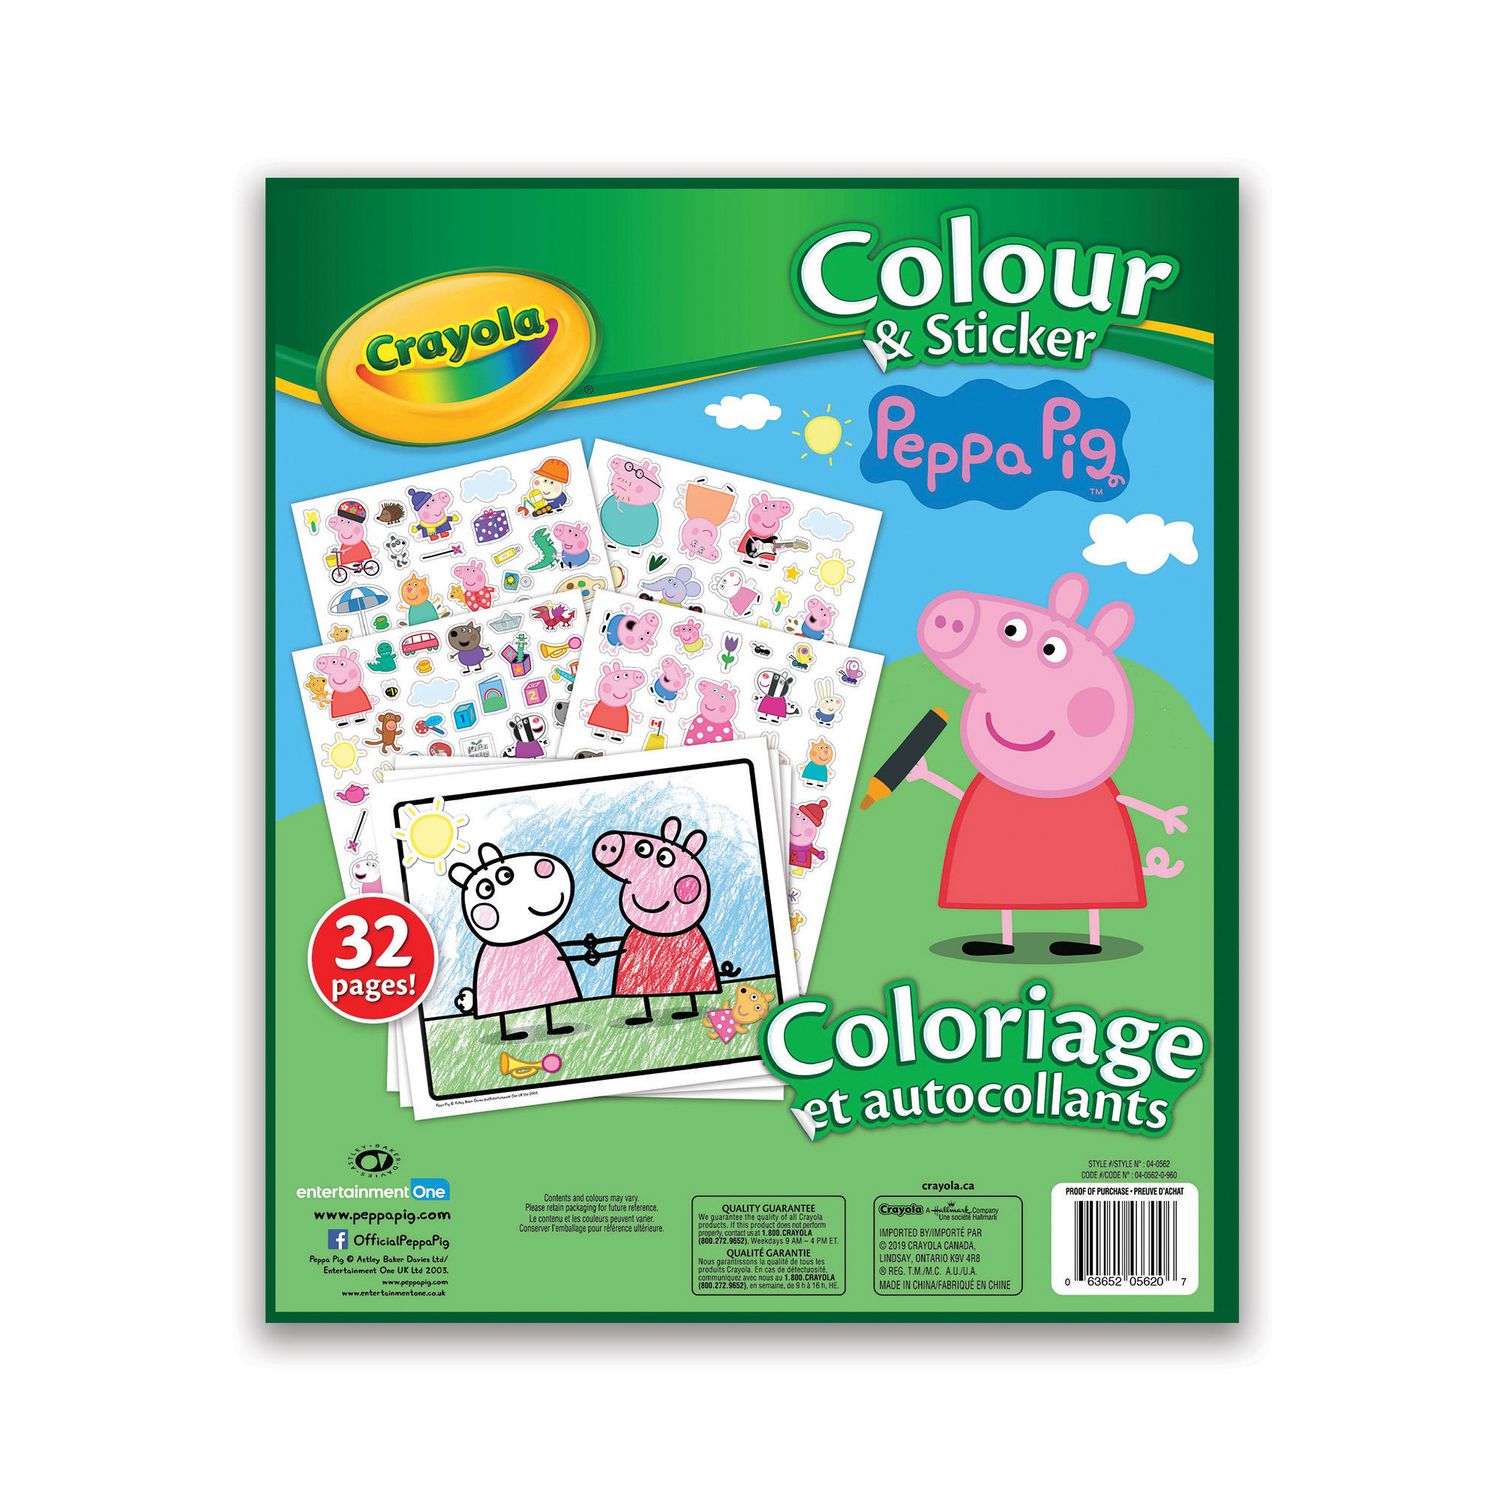 Crayola Colour & Sticker Book, Peppa Pig, Includes 32 colouring pages and 4  sticker sheets